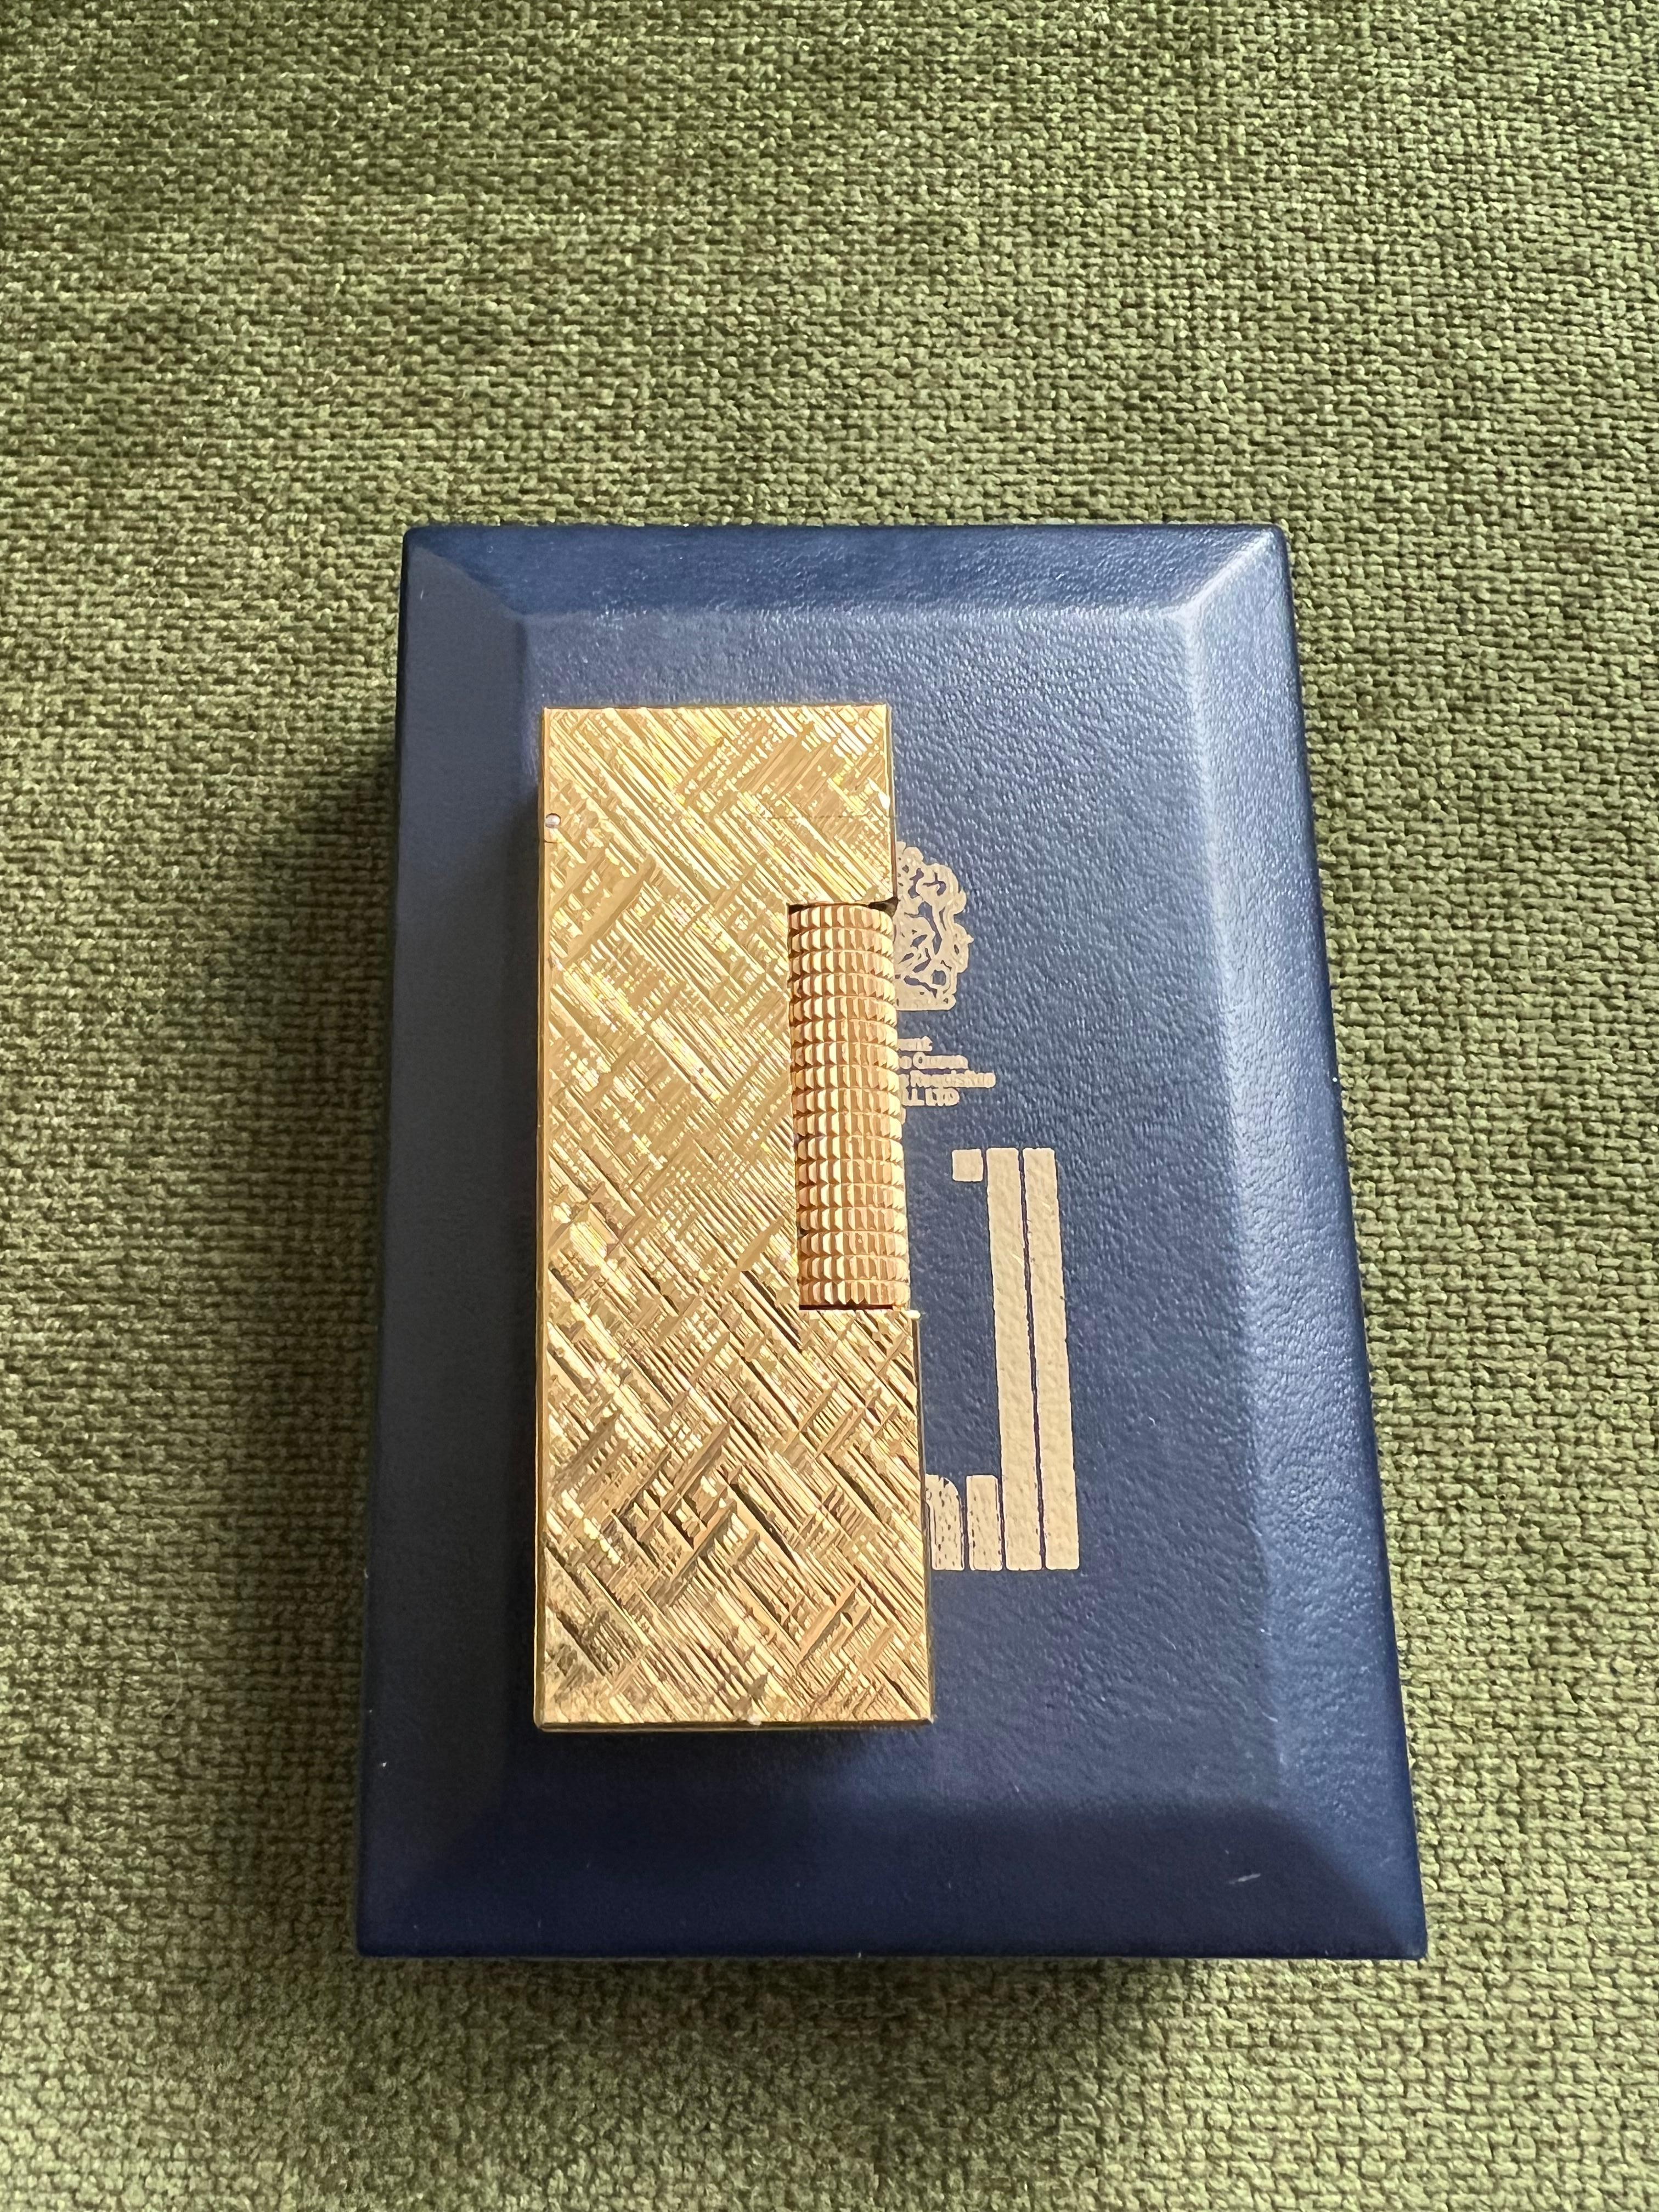 The Original James Bond Dunhill Vintage Gold Plated Iconic Lighter, circa 1970
Rare Vintage Dunhill gold plated Swiss Made lighter 
In mint condition.
Art Deco. 
Works perfectly. 
Iconic and beautifully engineered piece rare condition, 
James Bond